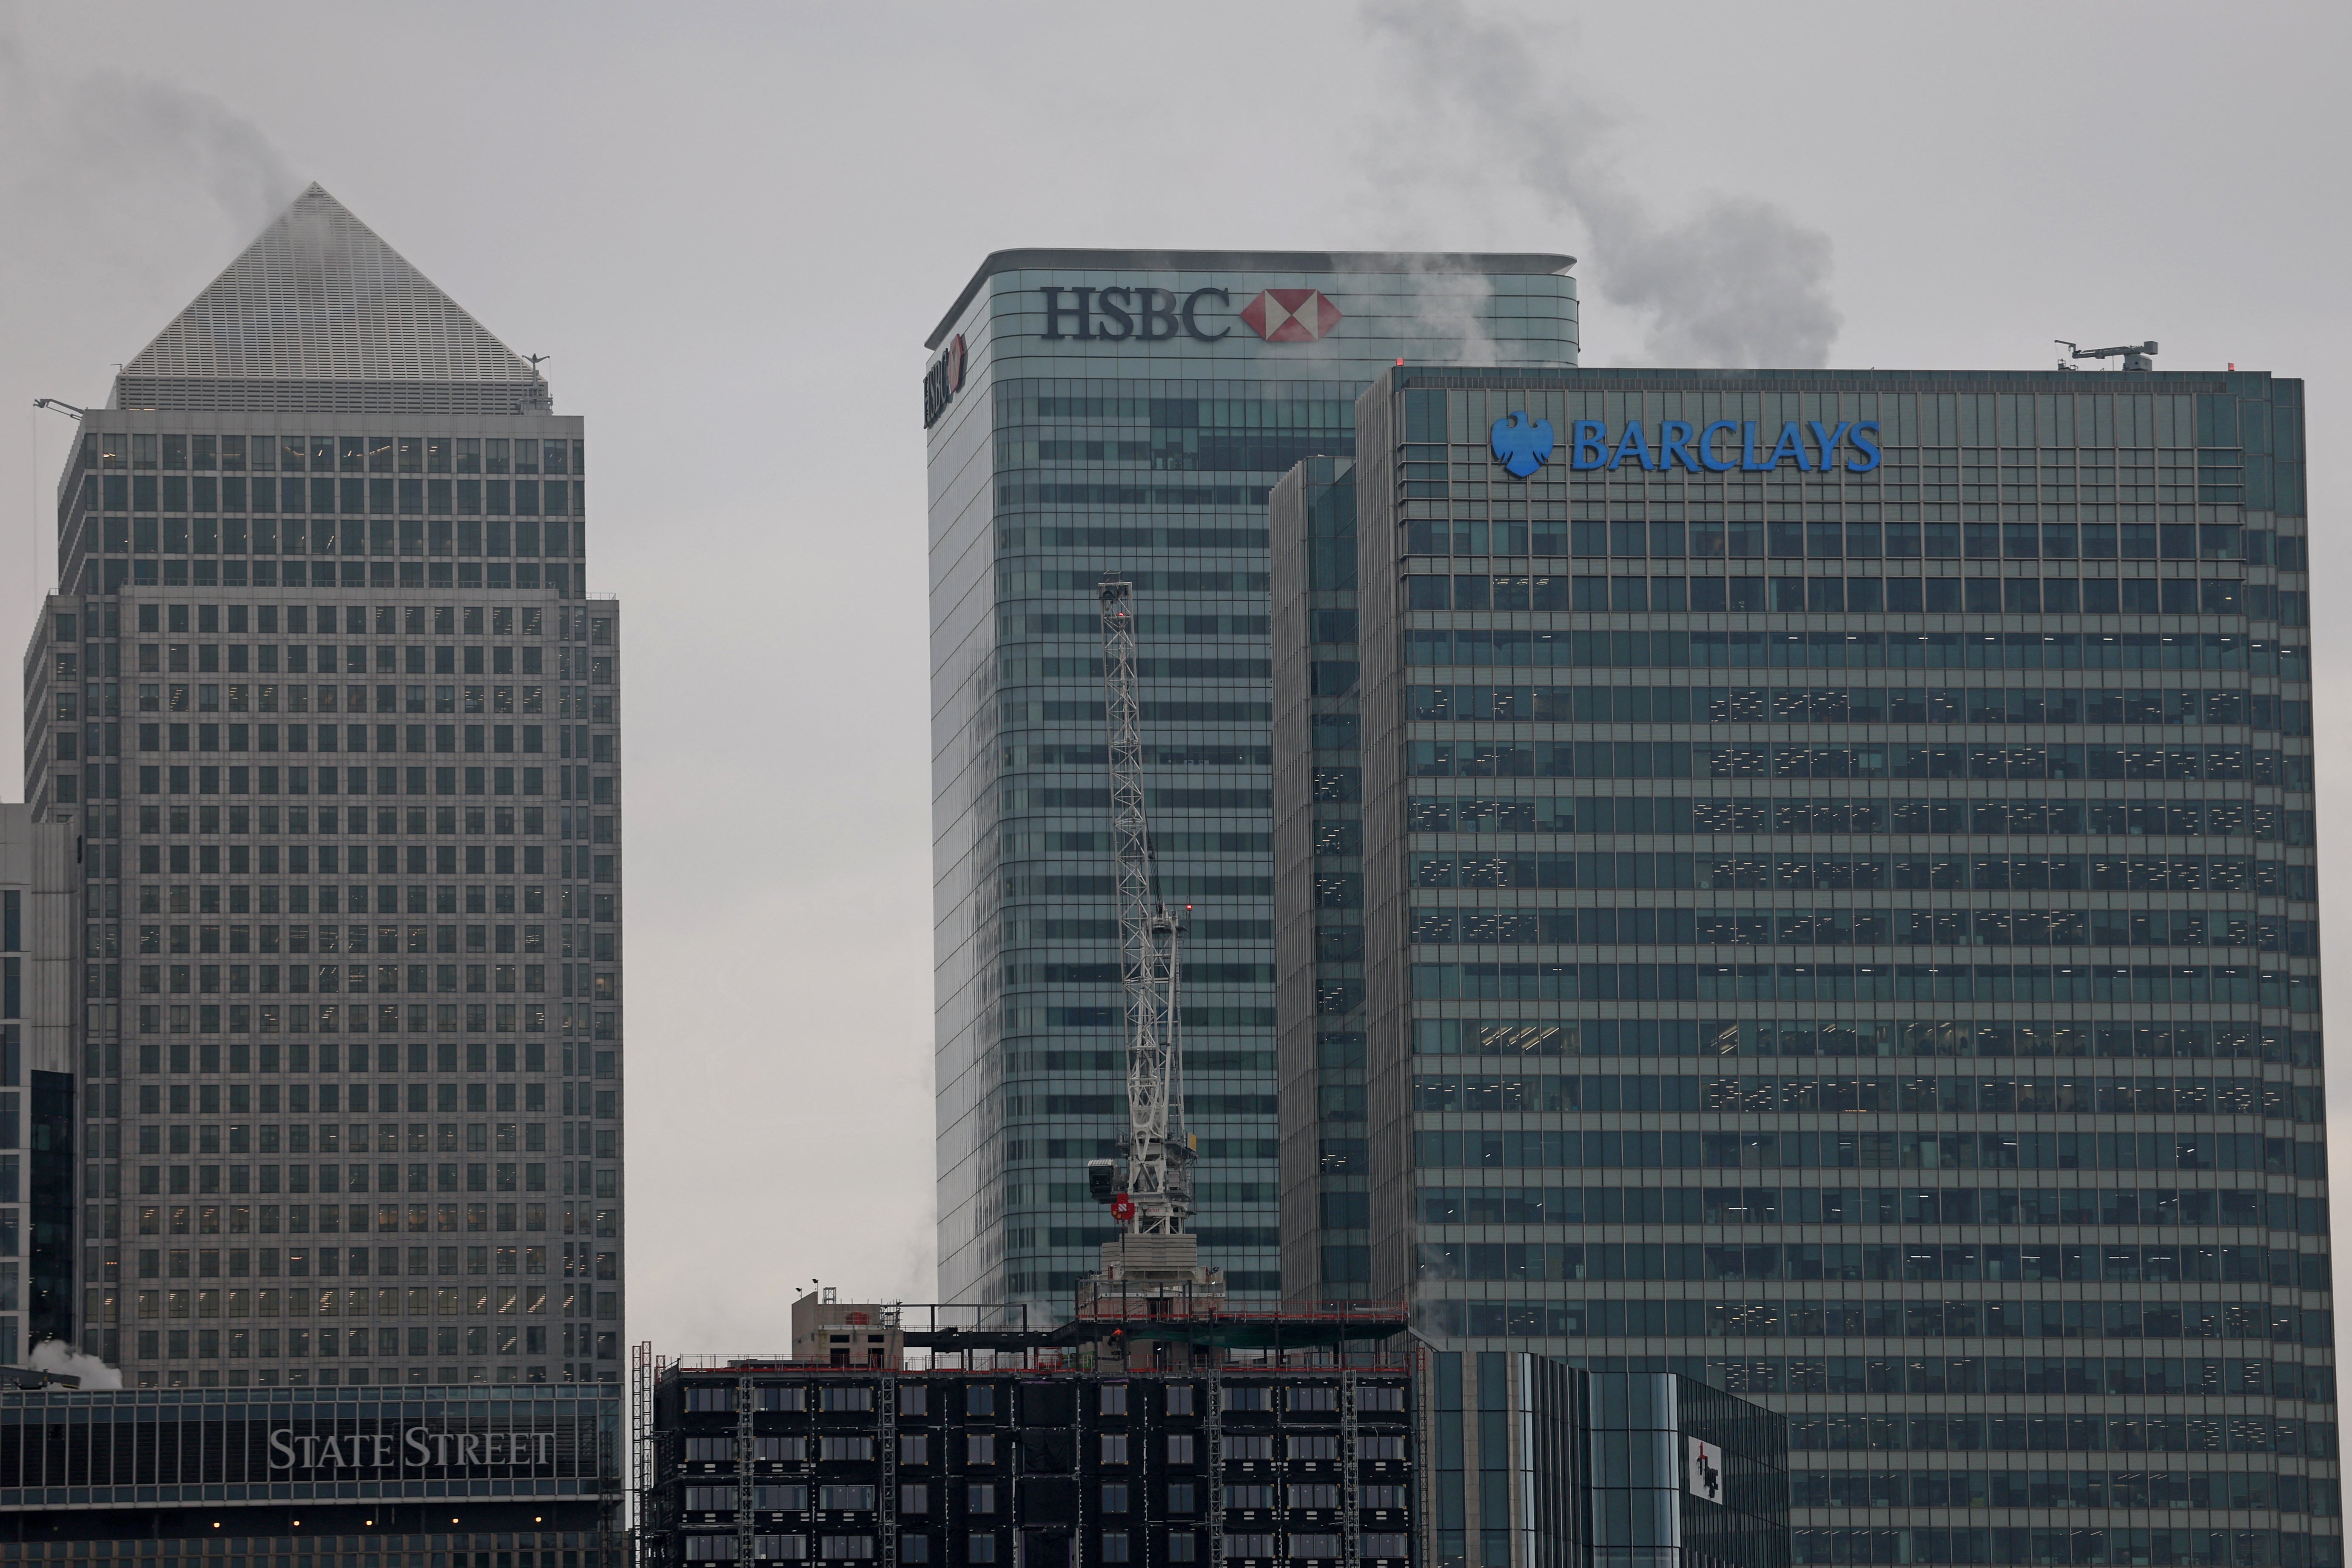 The offices of banking giants HSBC and Barclays